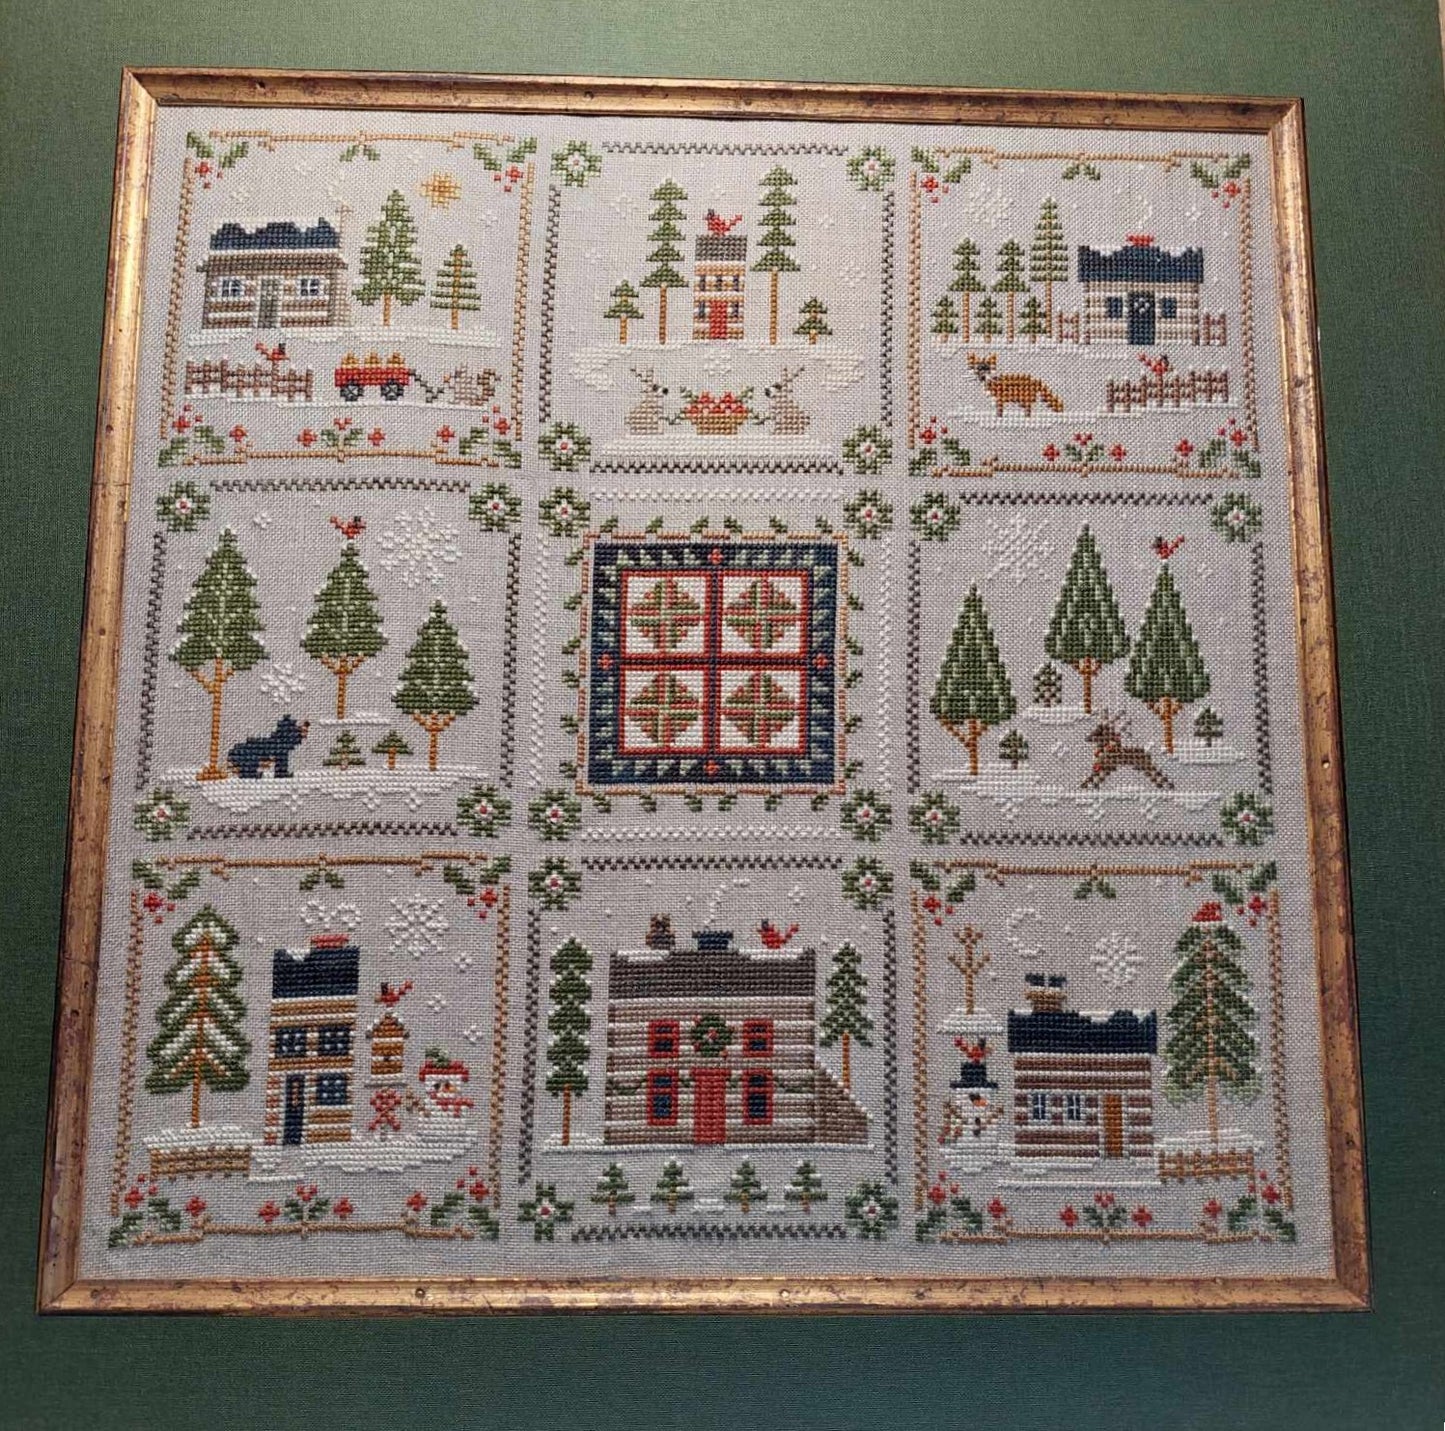 Log Cabin - Cross Stitch Patterns by Little House Needleworks